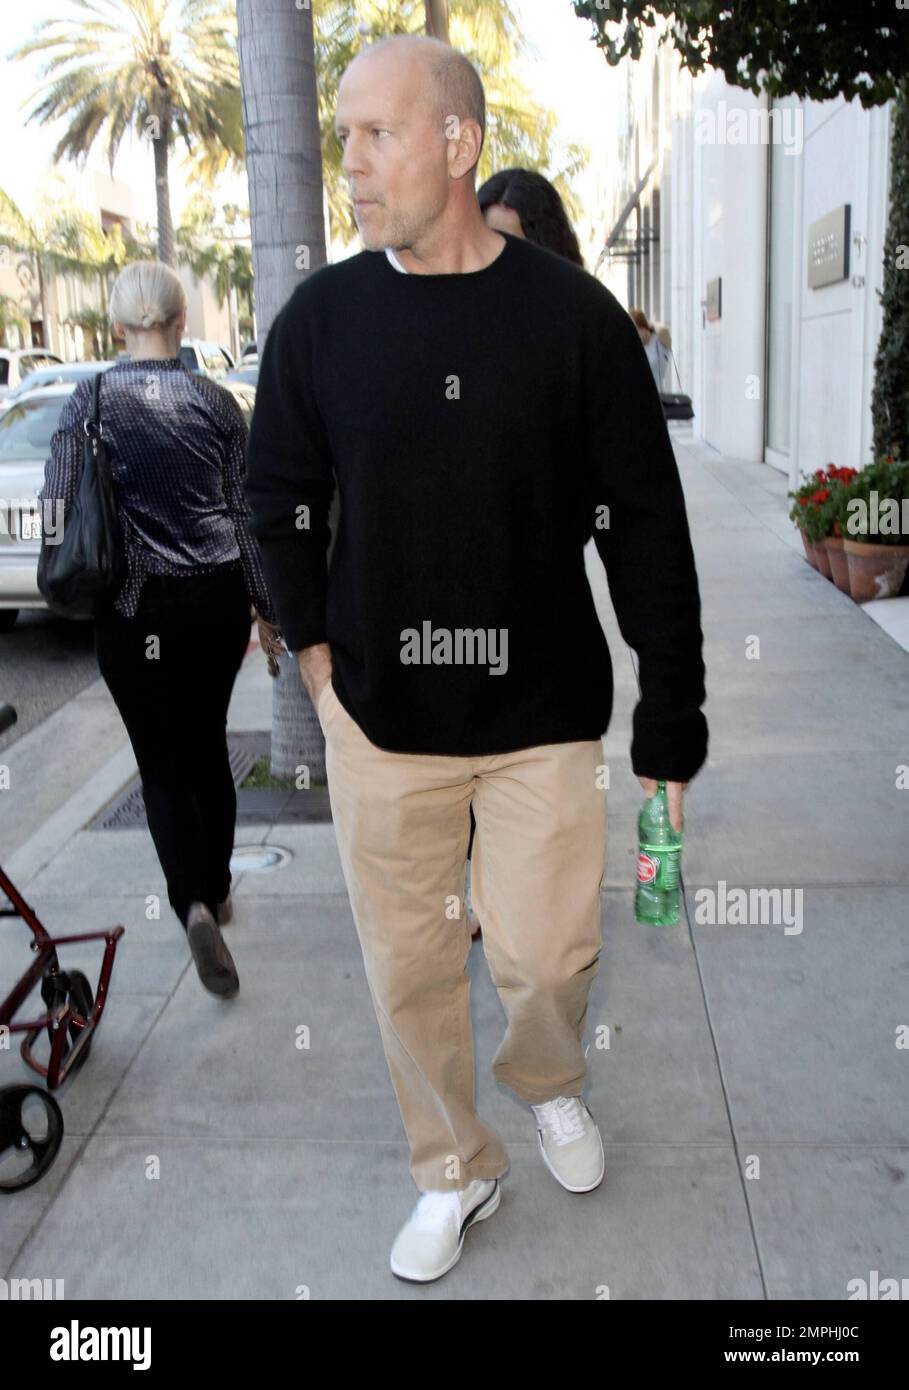 EXCLUSIVE!! Actor Bruce Willis strolls in Beverly Hills with pregnant wife Emma Heming. Bruce walked in front of Emma, 33, who kept her hand over her face. According to reports, Willis, 56, has been paying a lot of attention to ex-wife Demi Moore, providing support during her split with Ashton Kutcher. The reports say that, even though Bruce has been married to Emma for three years, he doesn't want to neglect her, but is 'Demi's closest friend,' and wants to make sure she stays strong. Beverly Hills, CA. 28th December 2011. Stock Photo